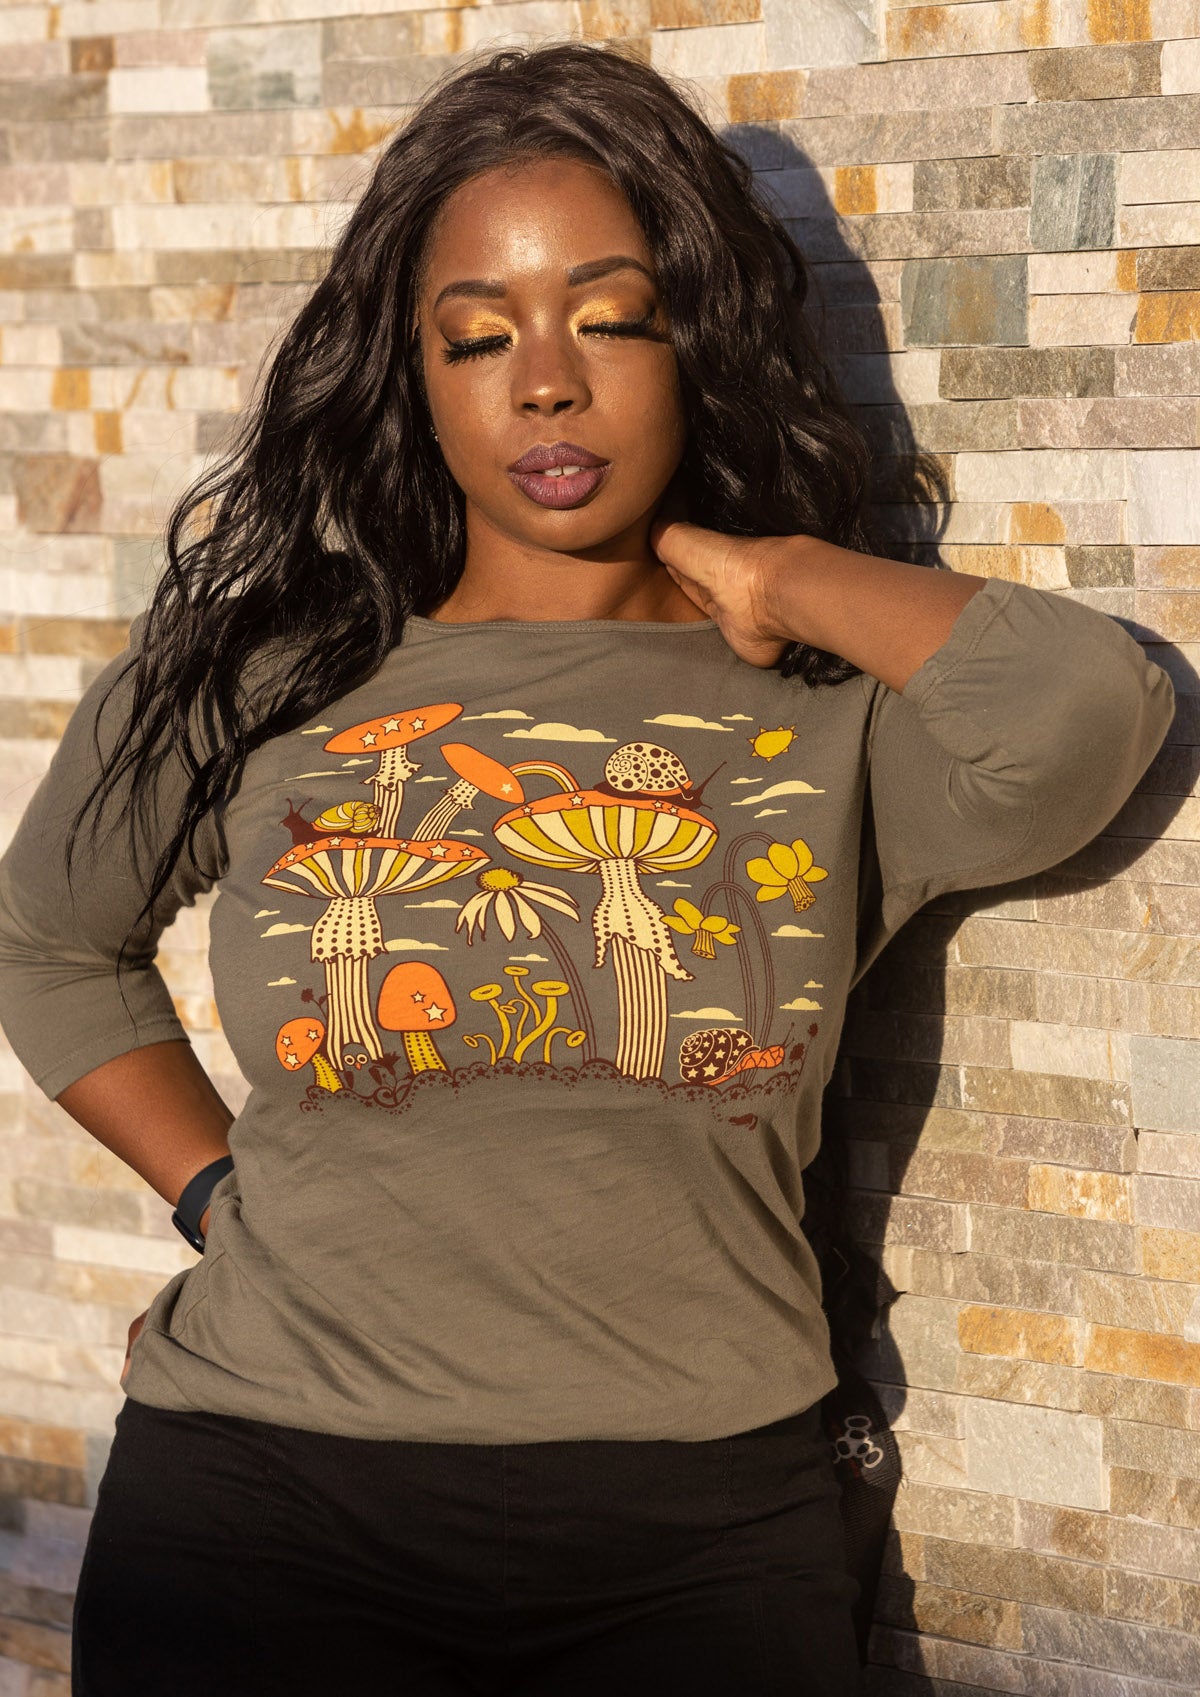 Long-haired model in olive green 3/4 sleeve tee with mushrooms, snails and flowers